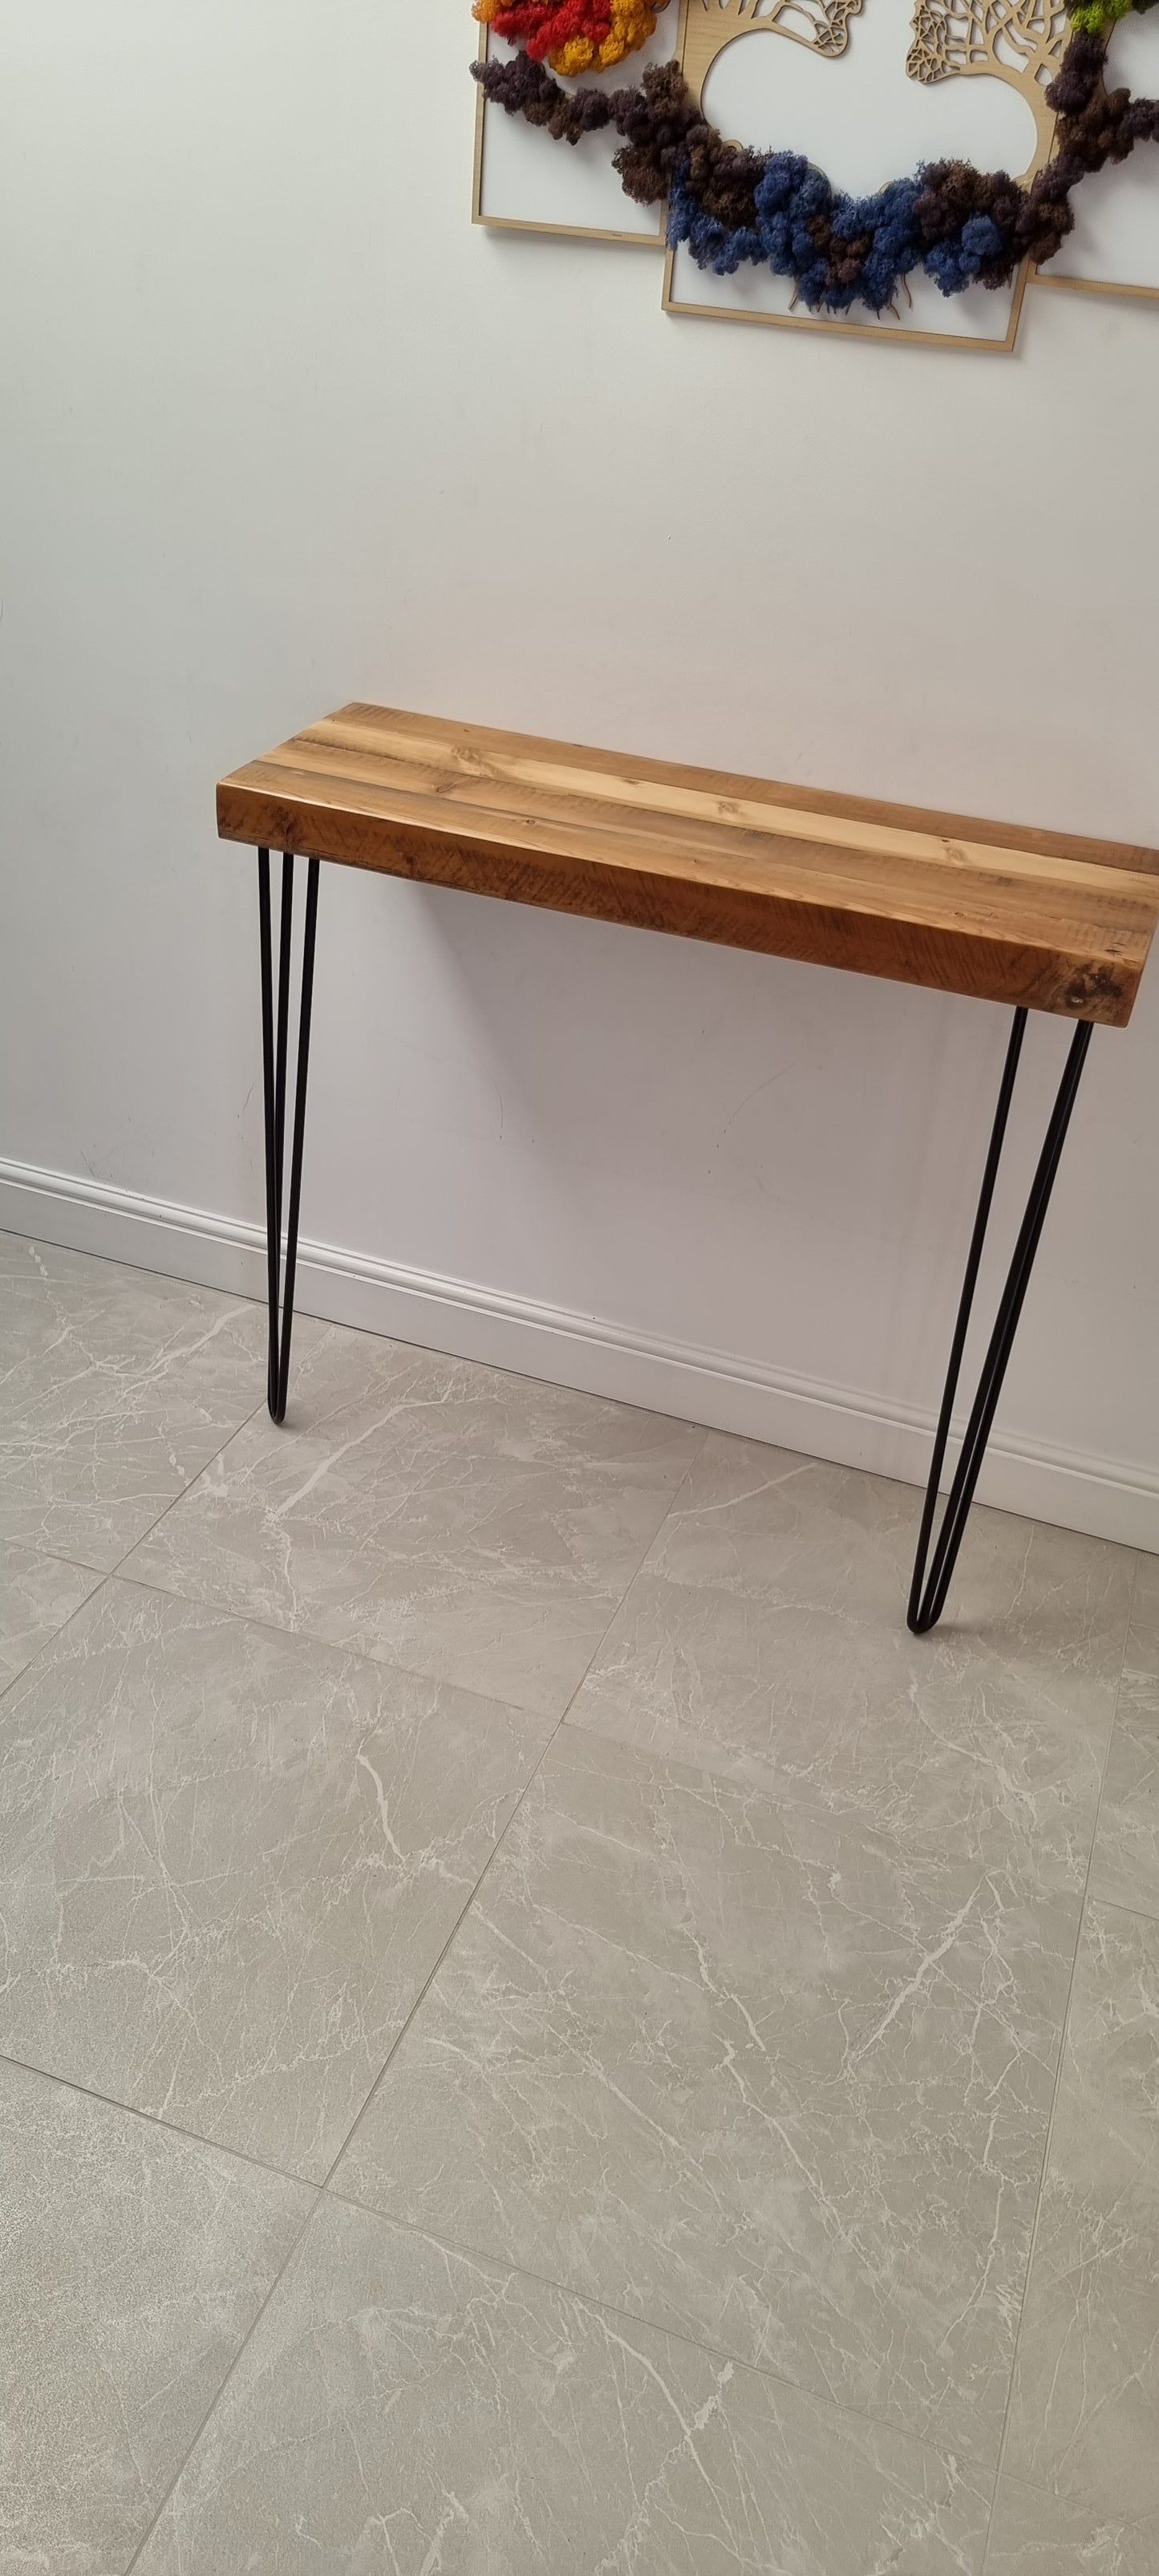 Radiator console table with hairpin legs